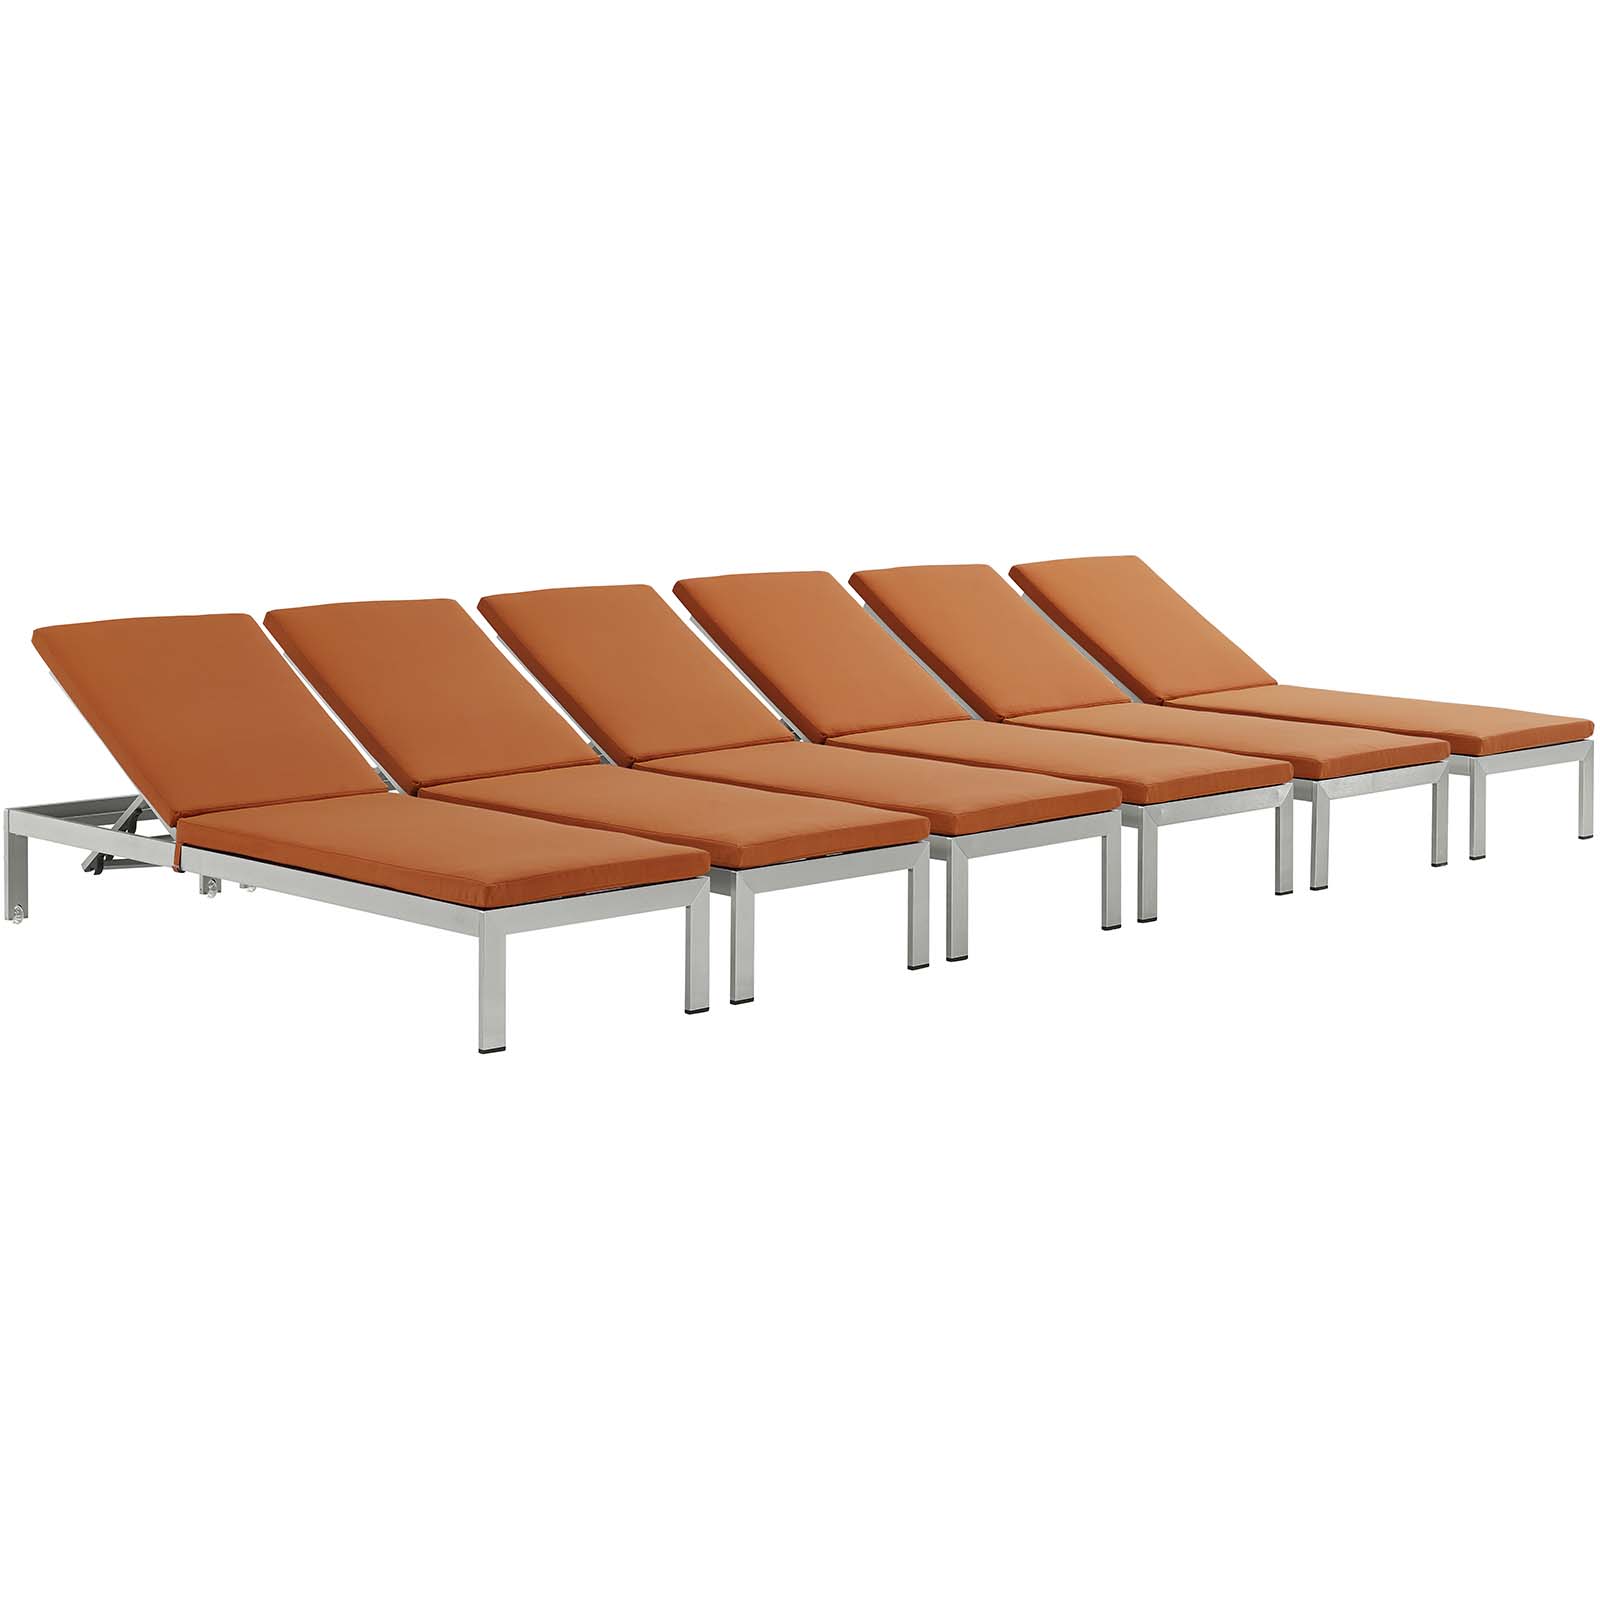 Modern Contemporary Urban Design Outdoor Patio Balcony Chaise Lounge Chair ( Set of 6), Orange, Aluminum - image 1 of 6